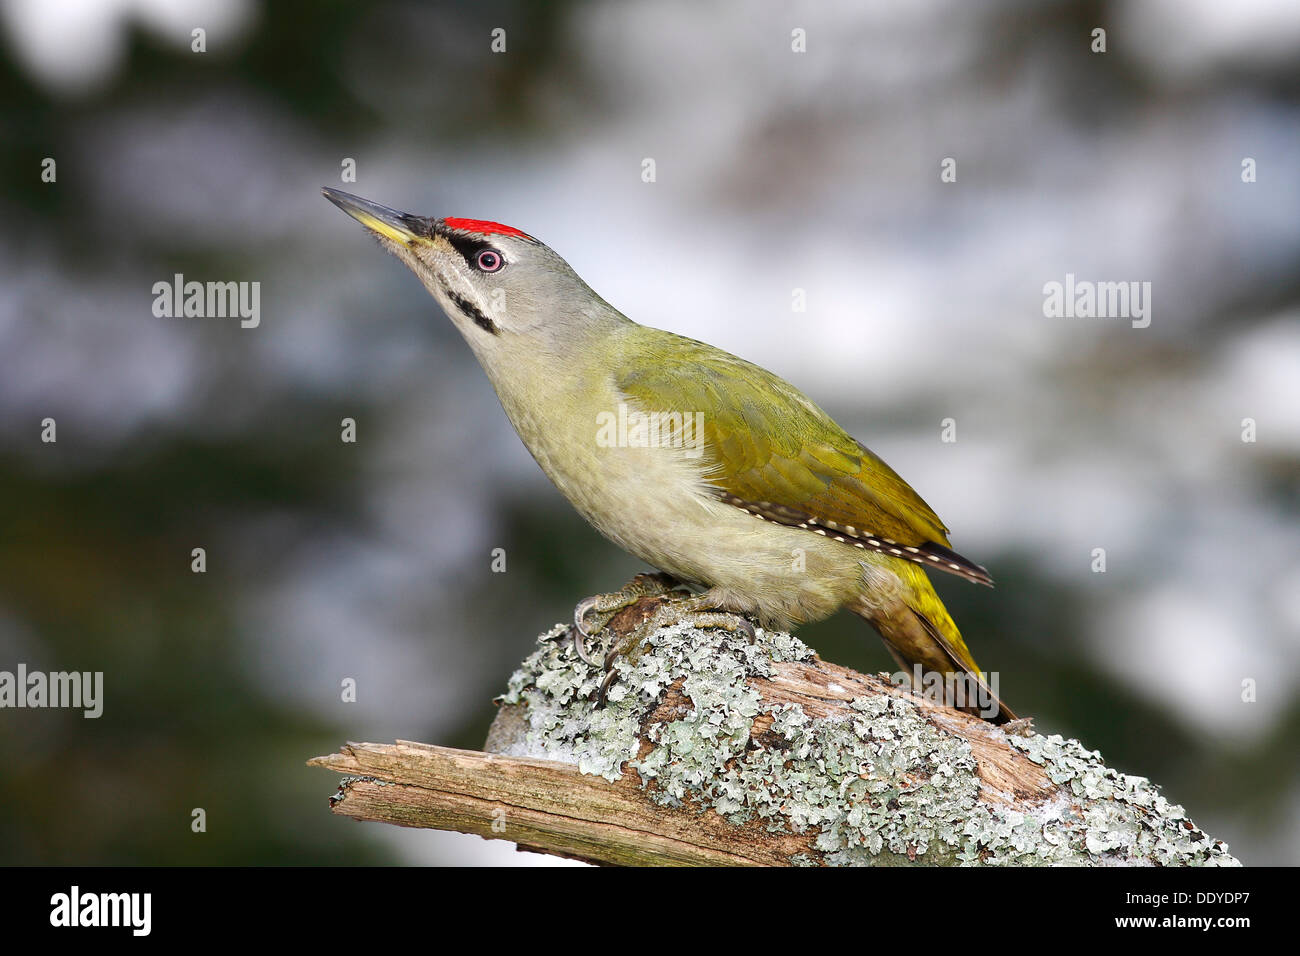 Grey-headed Woodpecker (Picus canus), male sitting on a lichen-covered tree trunk, looking attentively Stock Photo